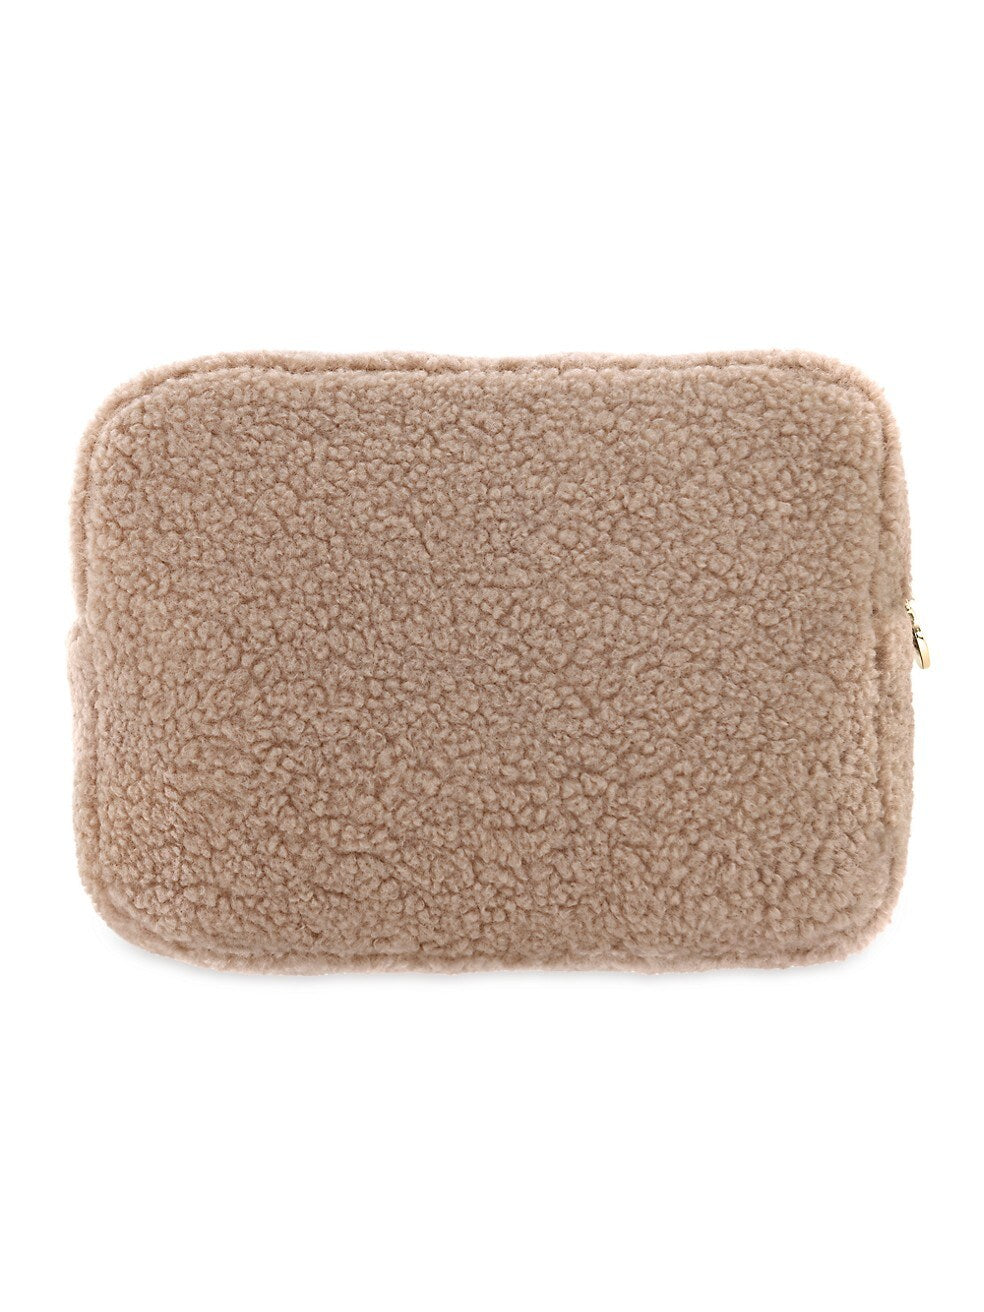 Sherpa Cozy Large Pouch by Stoney Clover, Rose